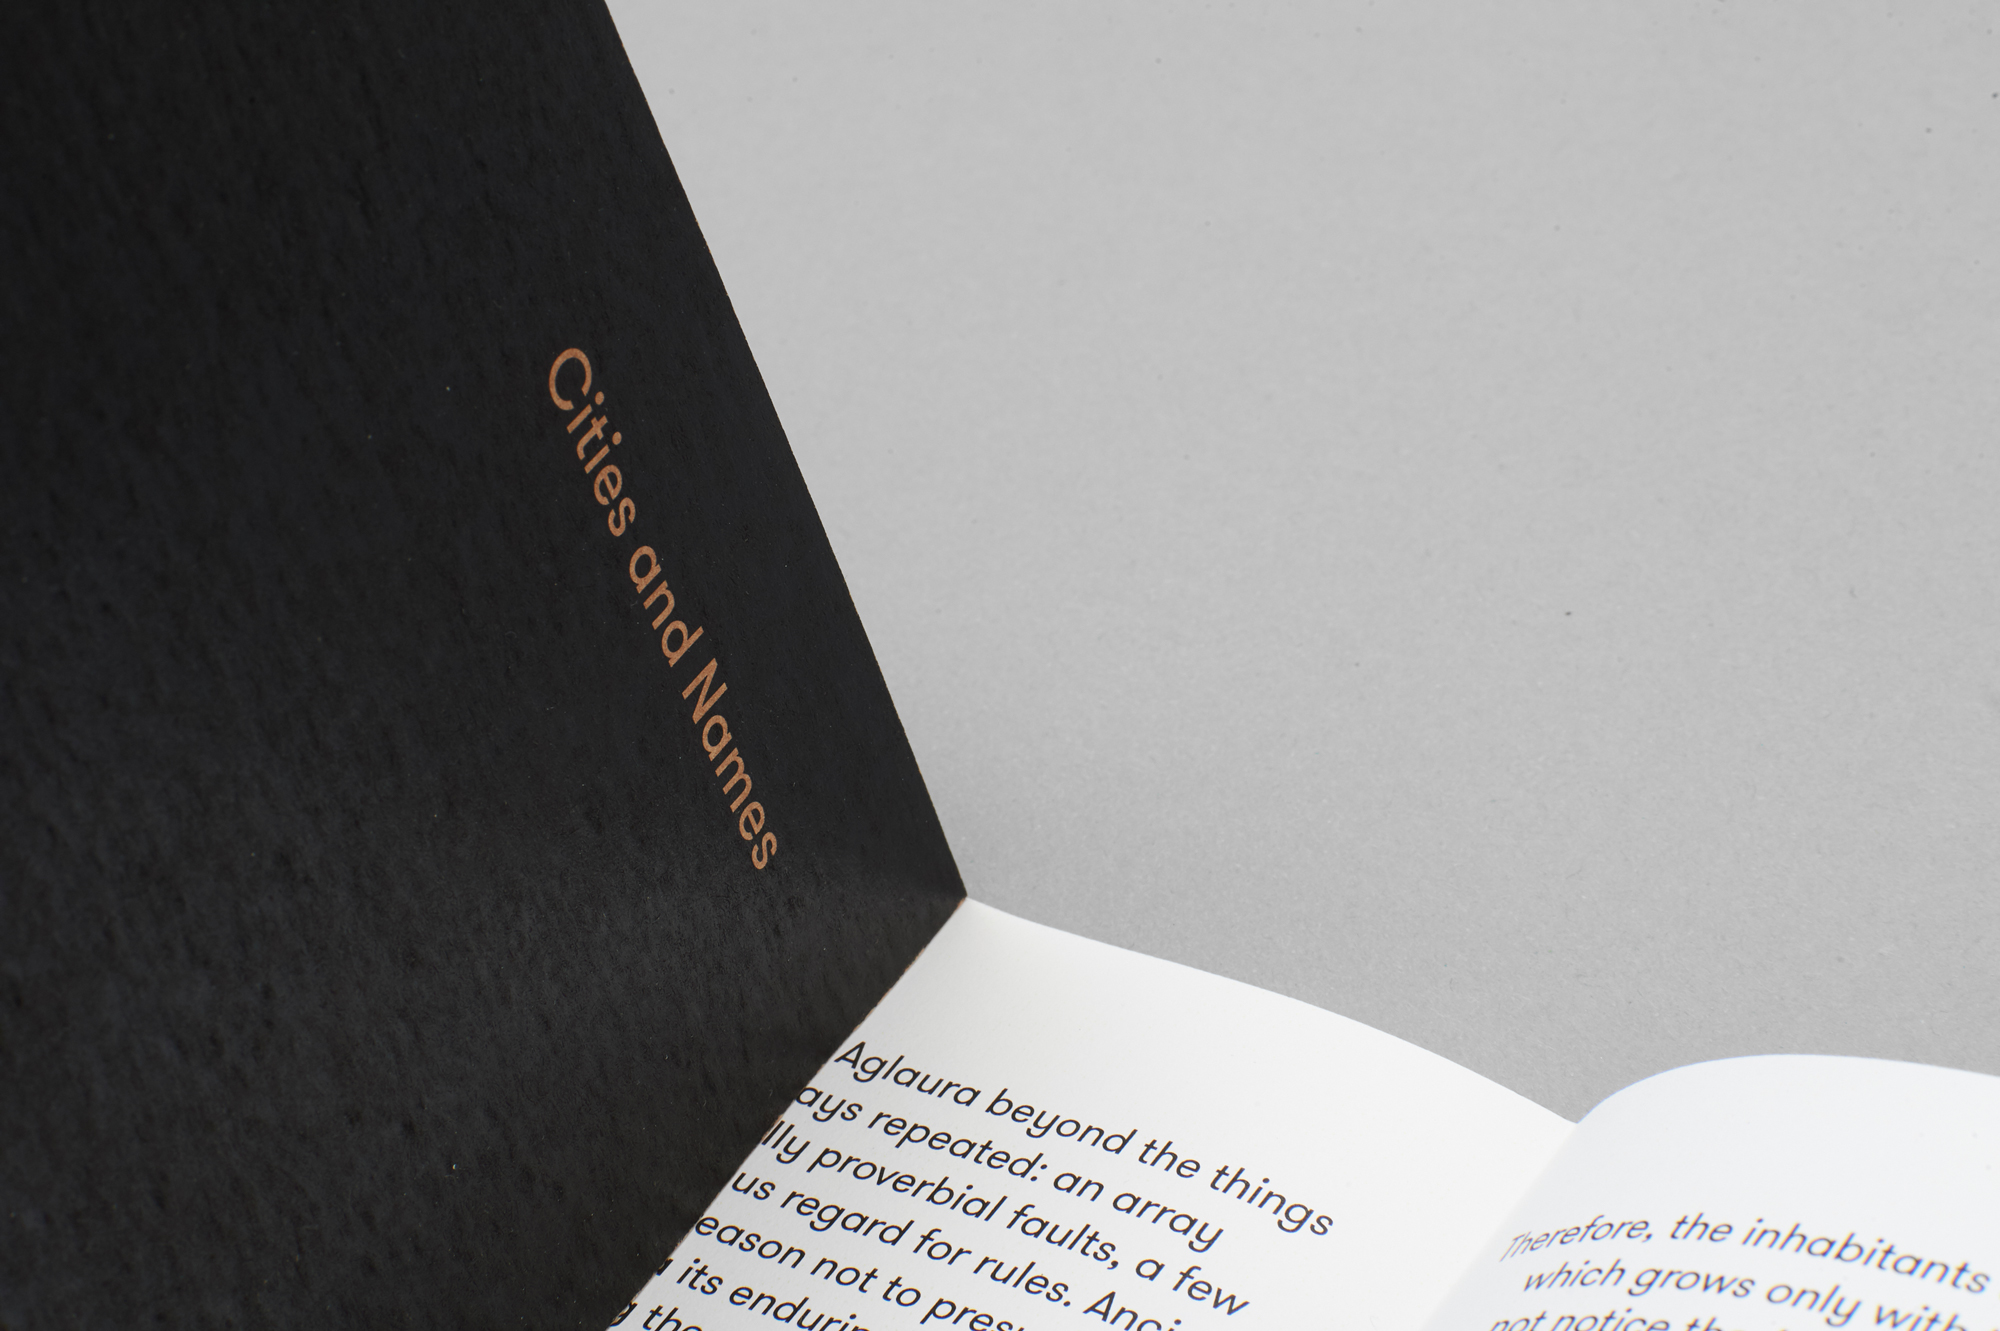 Elegant Editorial Design Project: Cities and Names